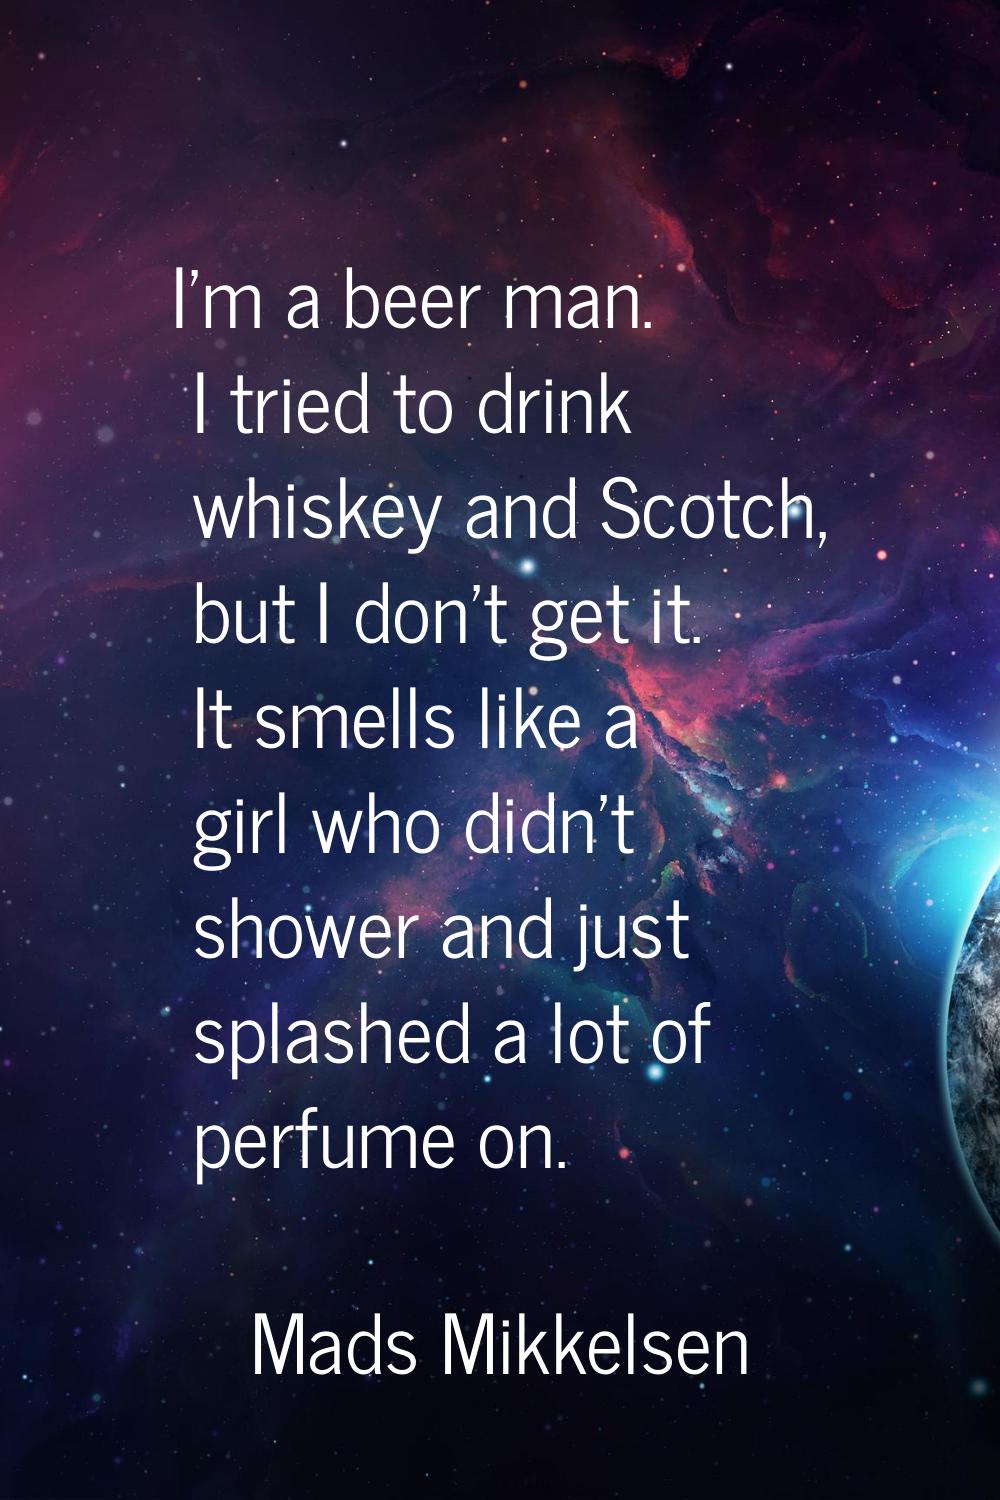 I'm a beer man. I tried to drink whiskey and Scotch, but I don't get it. It smells like a girl who 